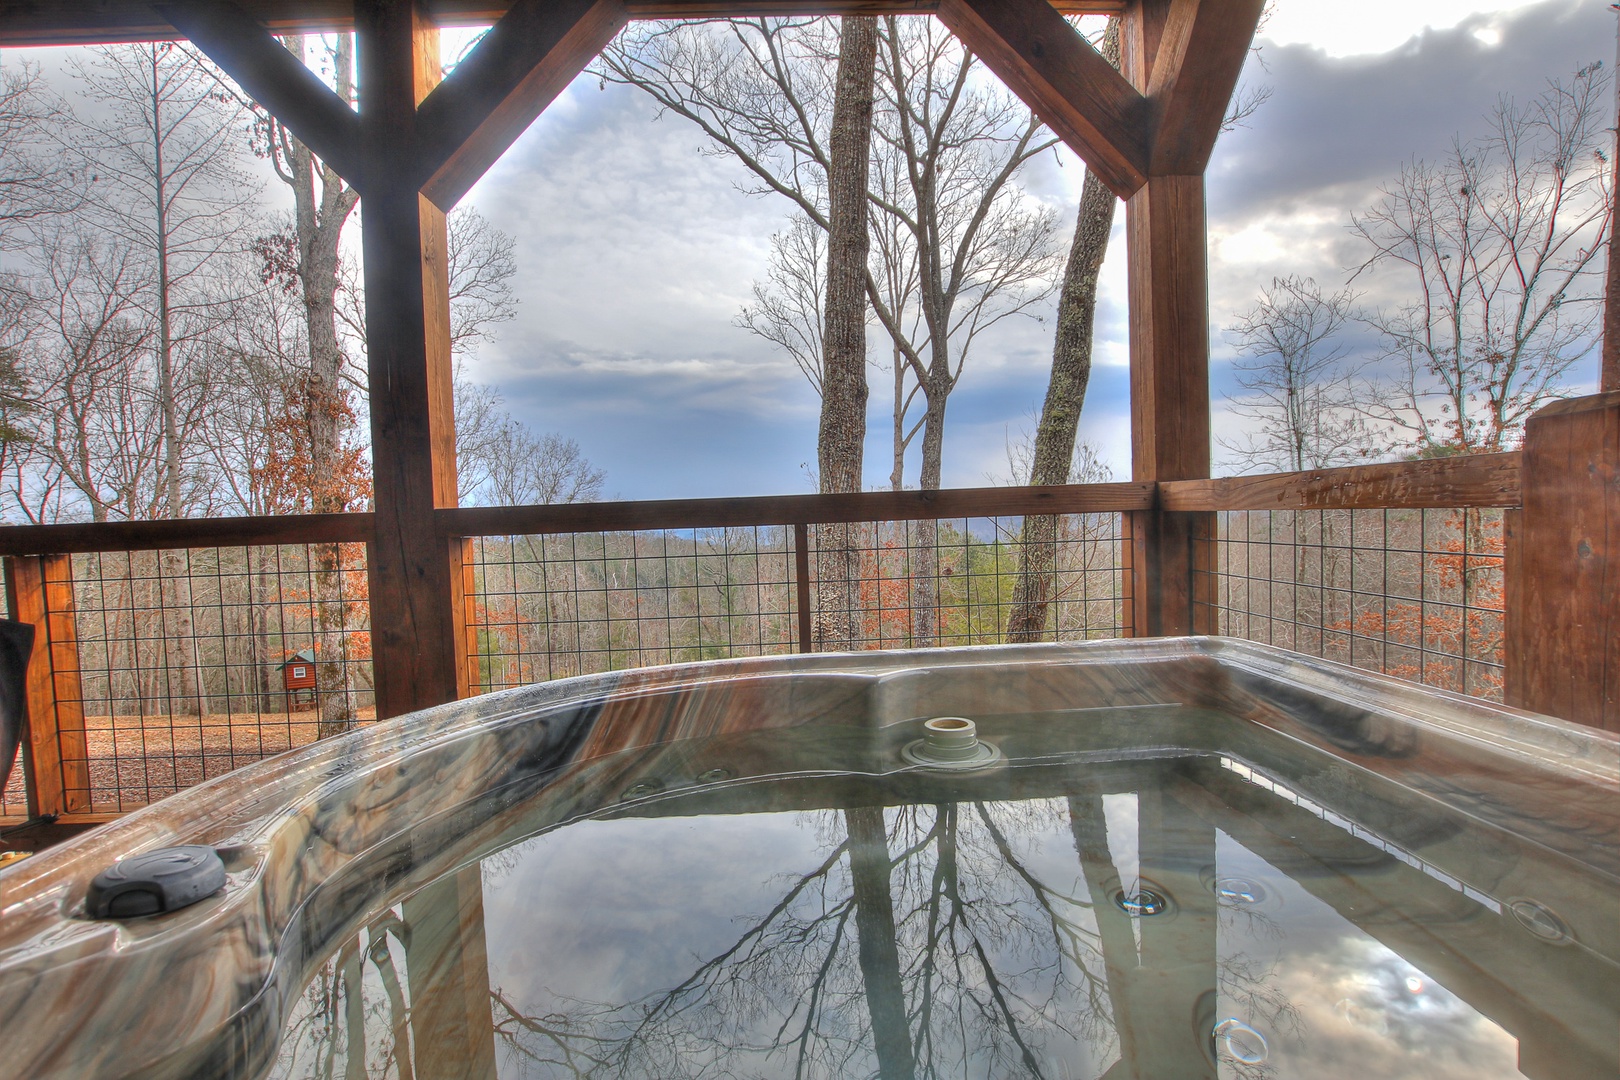 Once In A Blue Ridge: Lower-level Hot Tub View